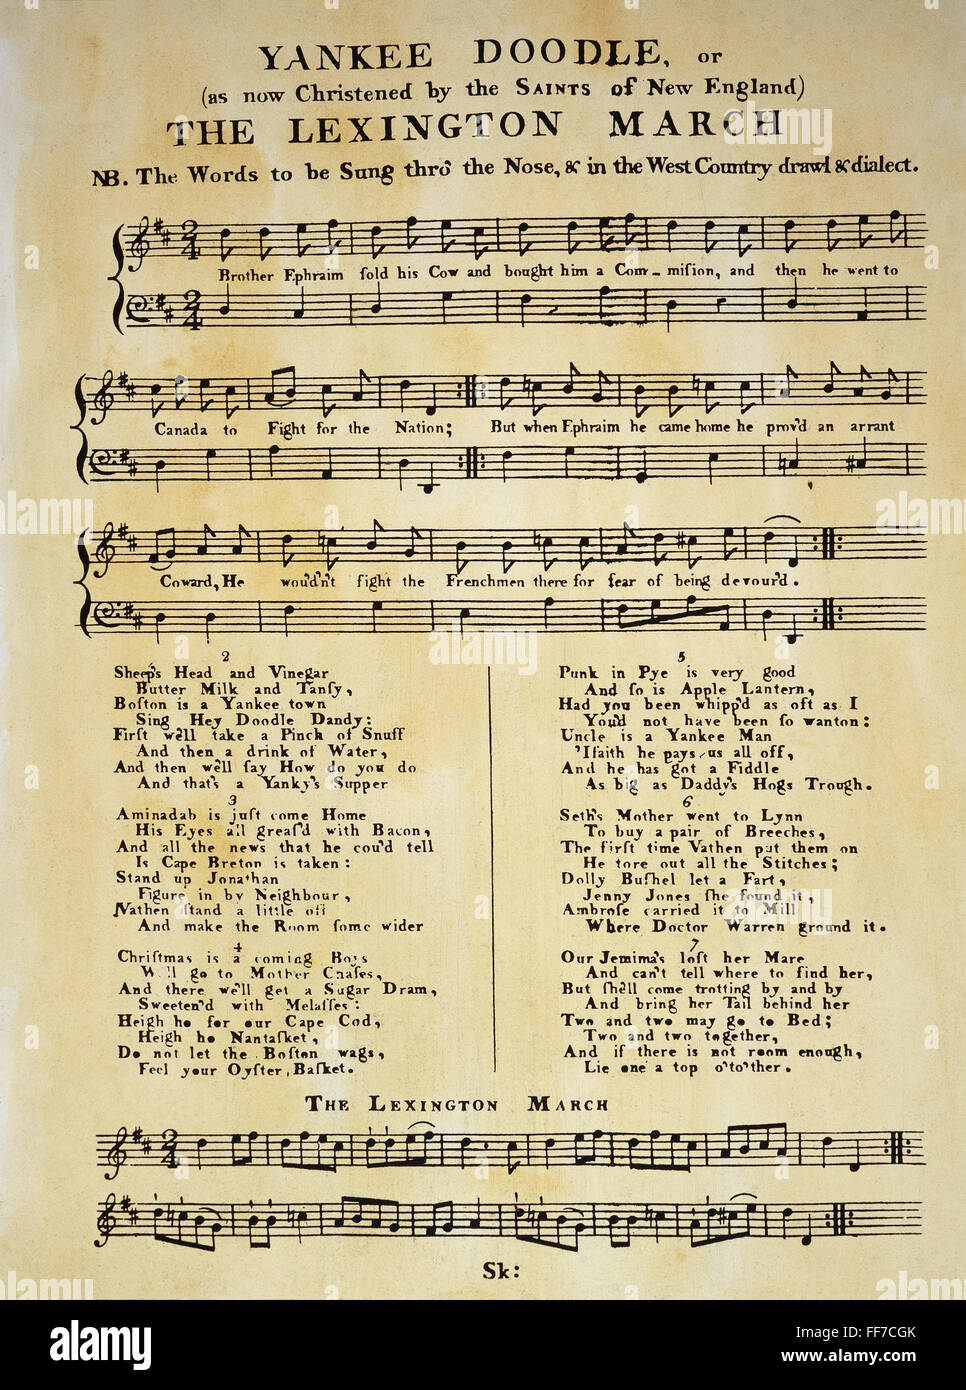 YANKEE DOODLE MUSIC, 1775. /nThe first publication of 'Yankee Doodle' as sheet music, London, 1775. Stock Photo